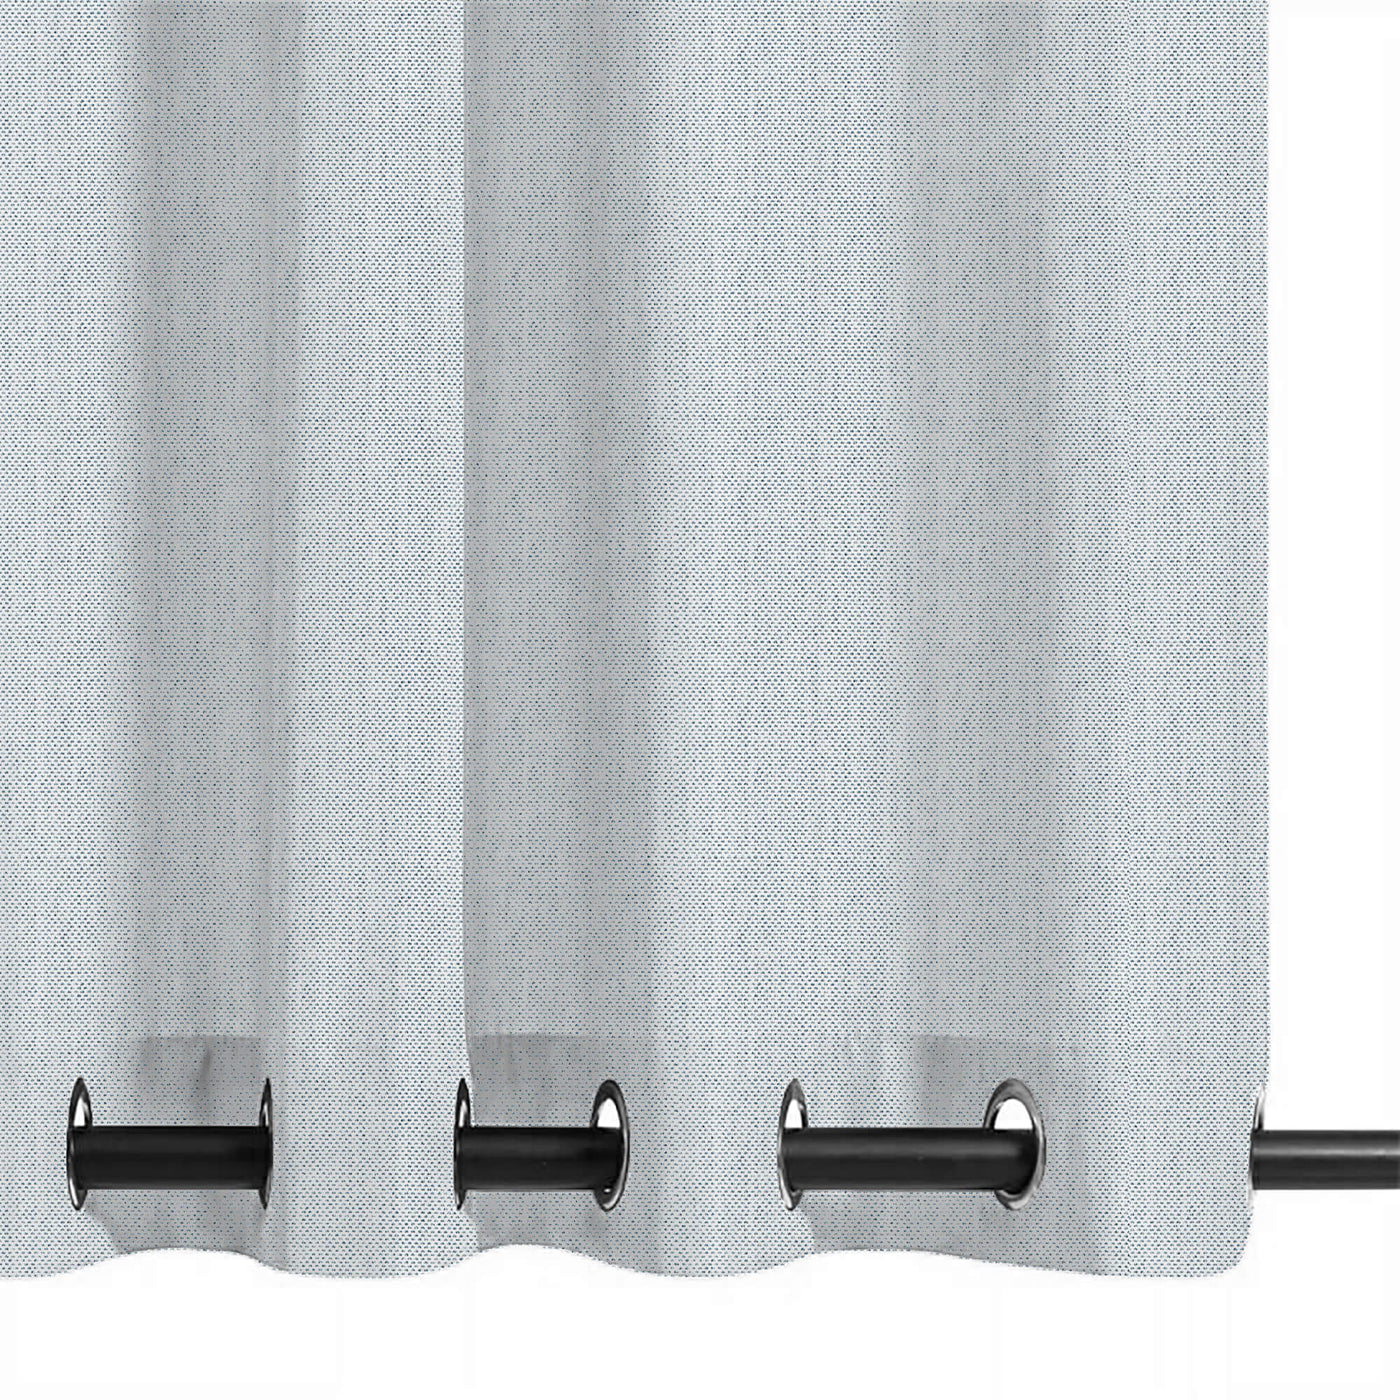 PENGI Outdoor Curtains Waterproof - Sailcloth Foggy Dew